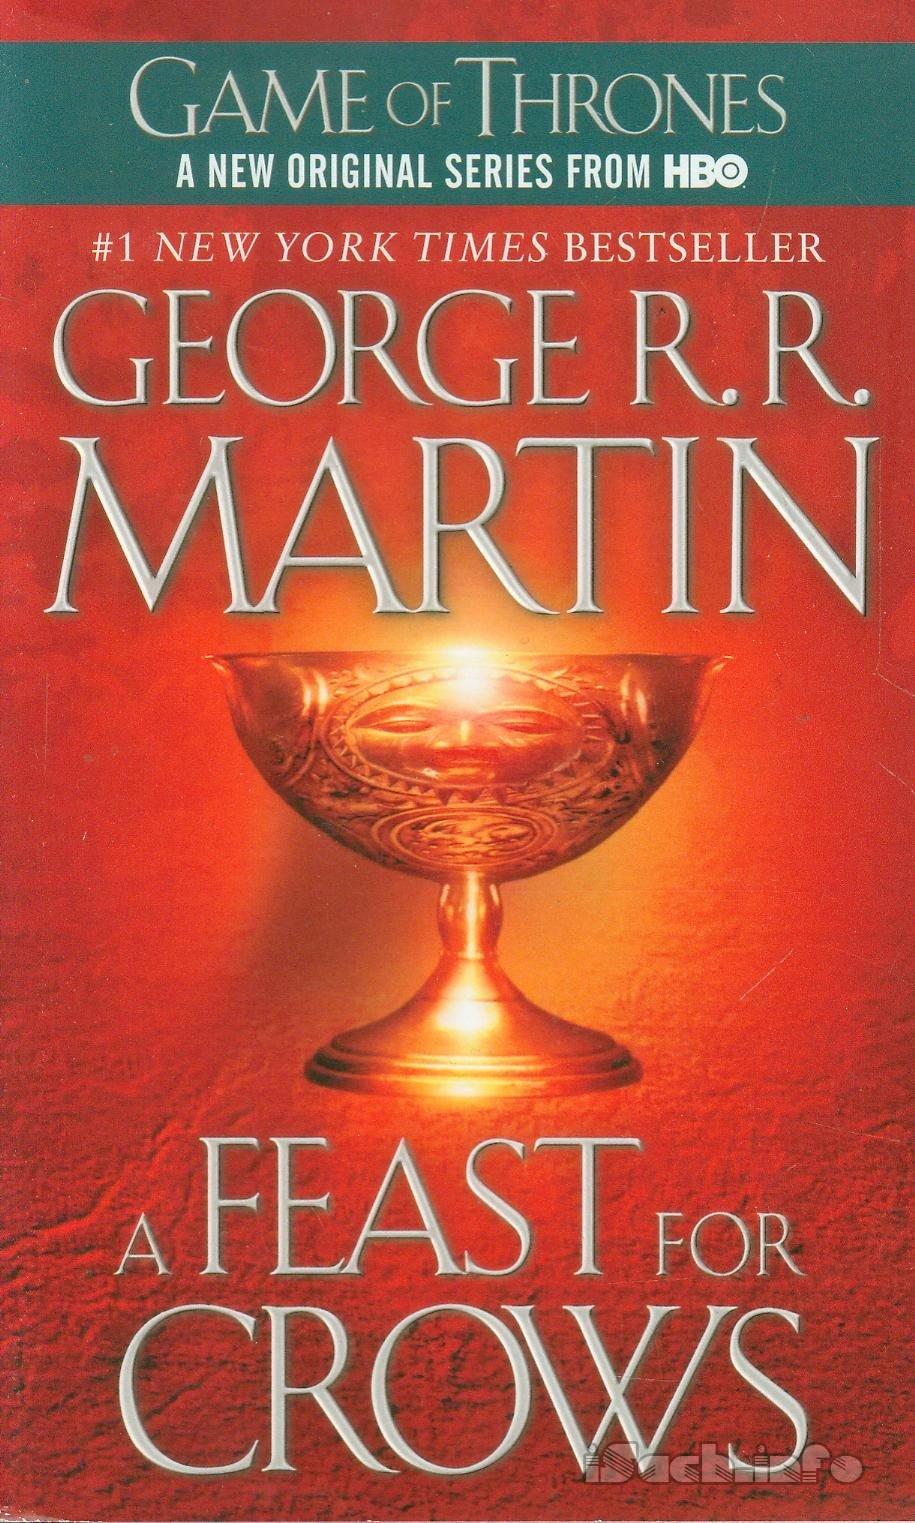 Song Of Ice And Fire: A Feast For Crows